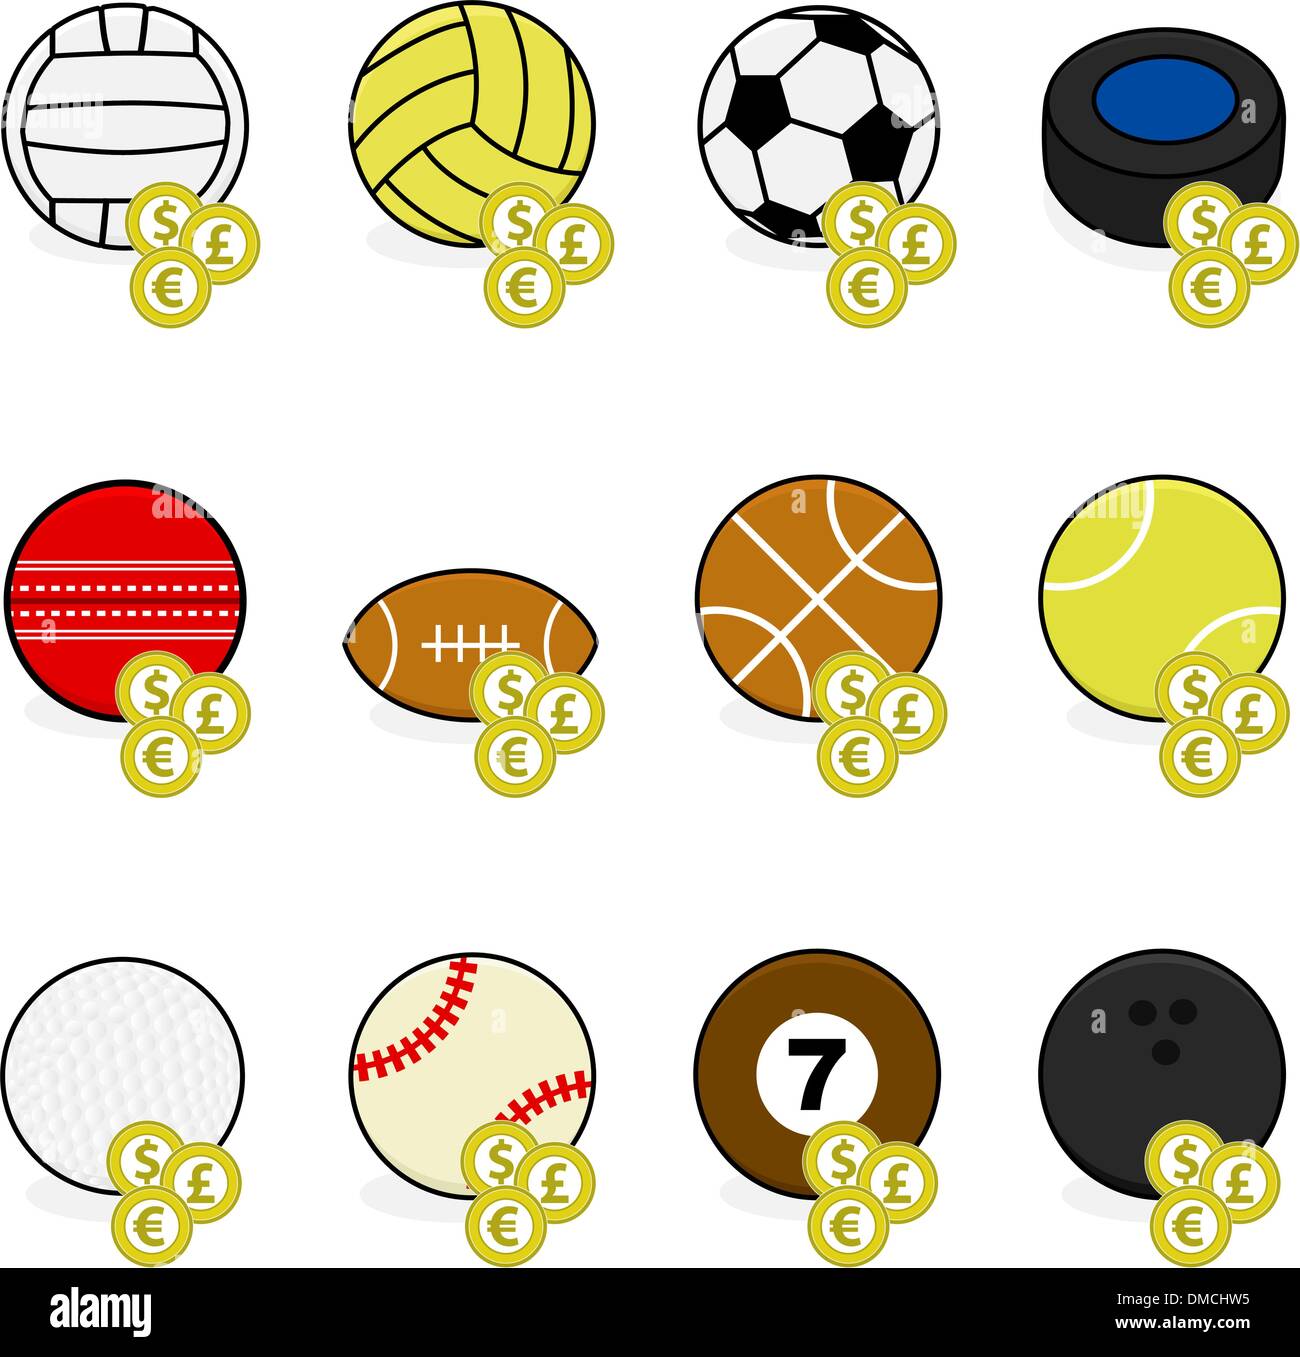 Sports betting icons Stock Vector